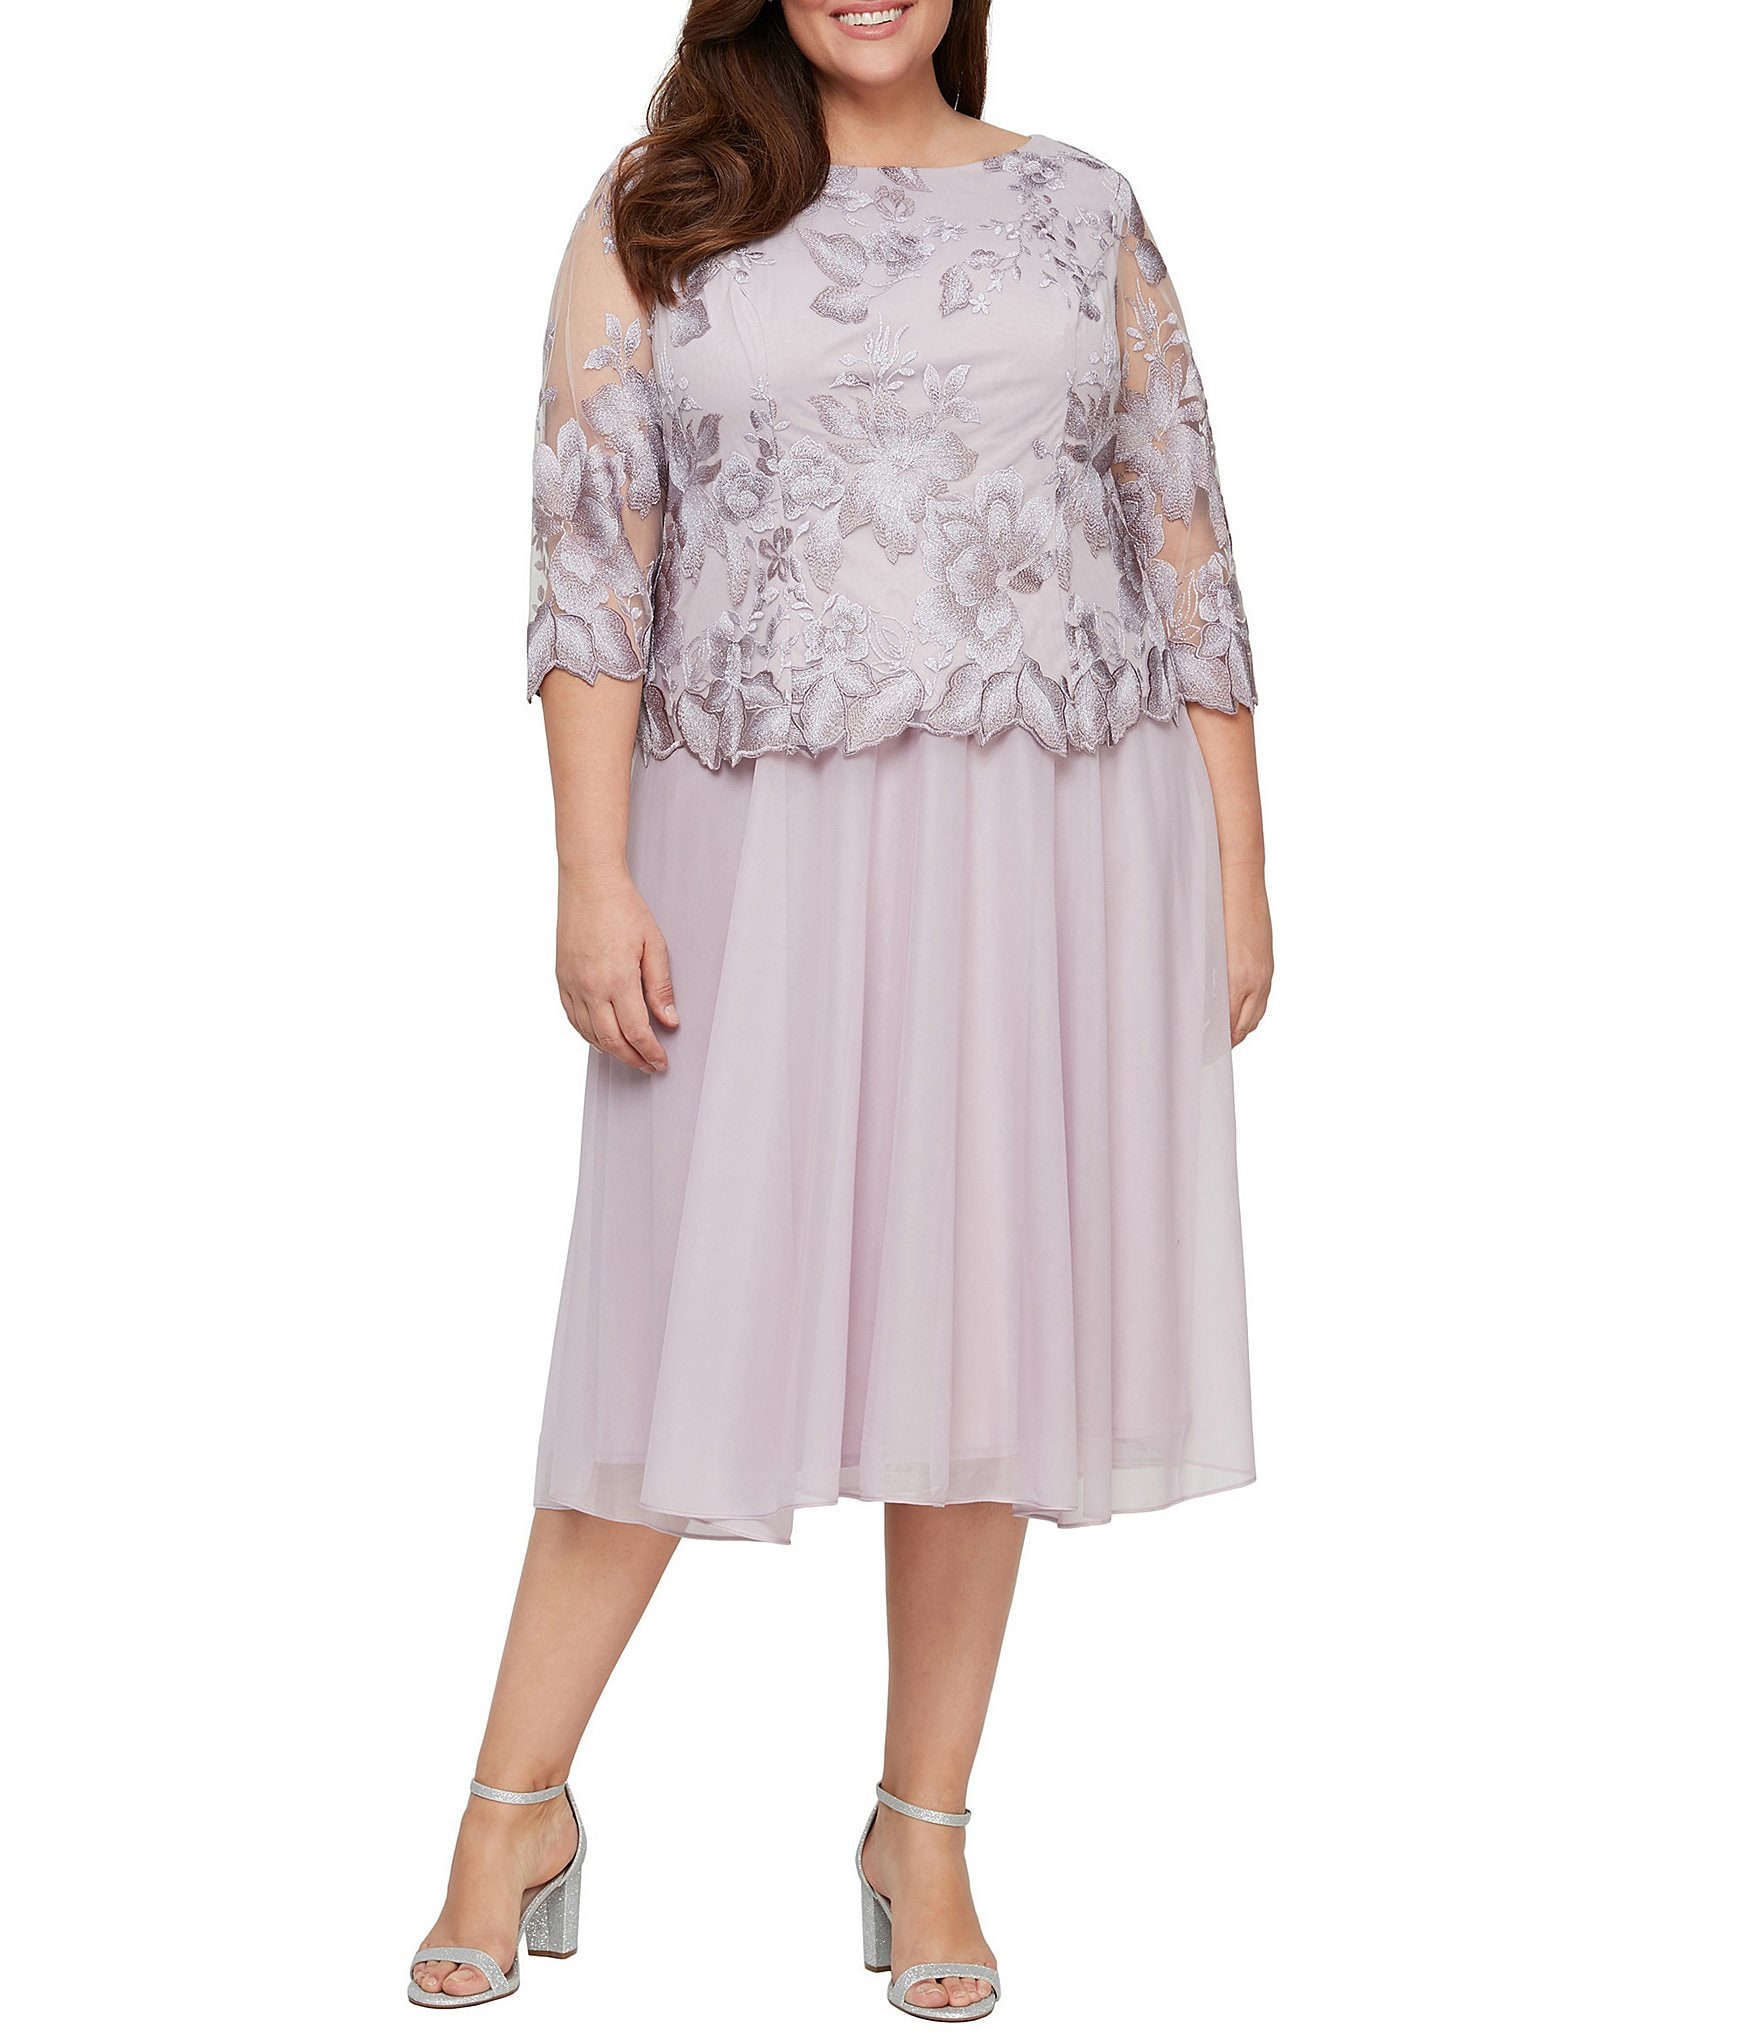 Alex Evenings Plus Size Jewel Neck 3/4 Sleeve Floral Embroidered ...